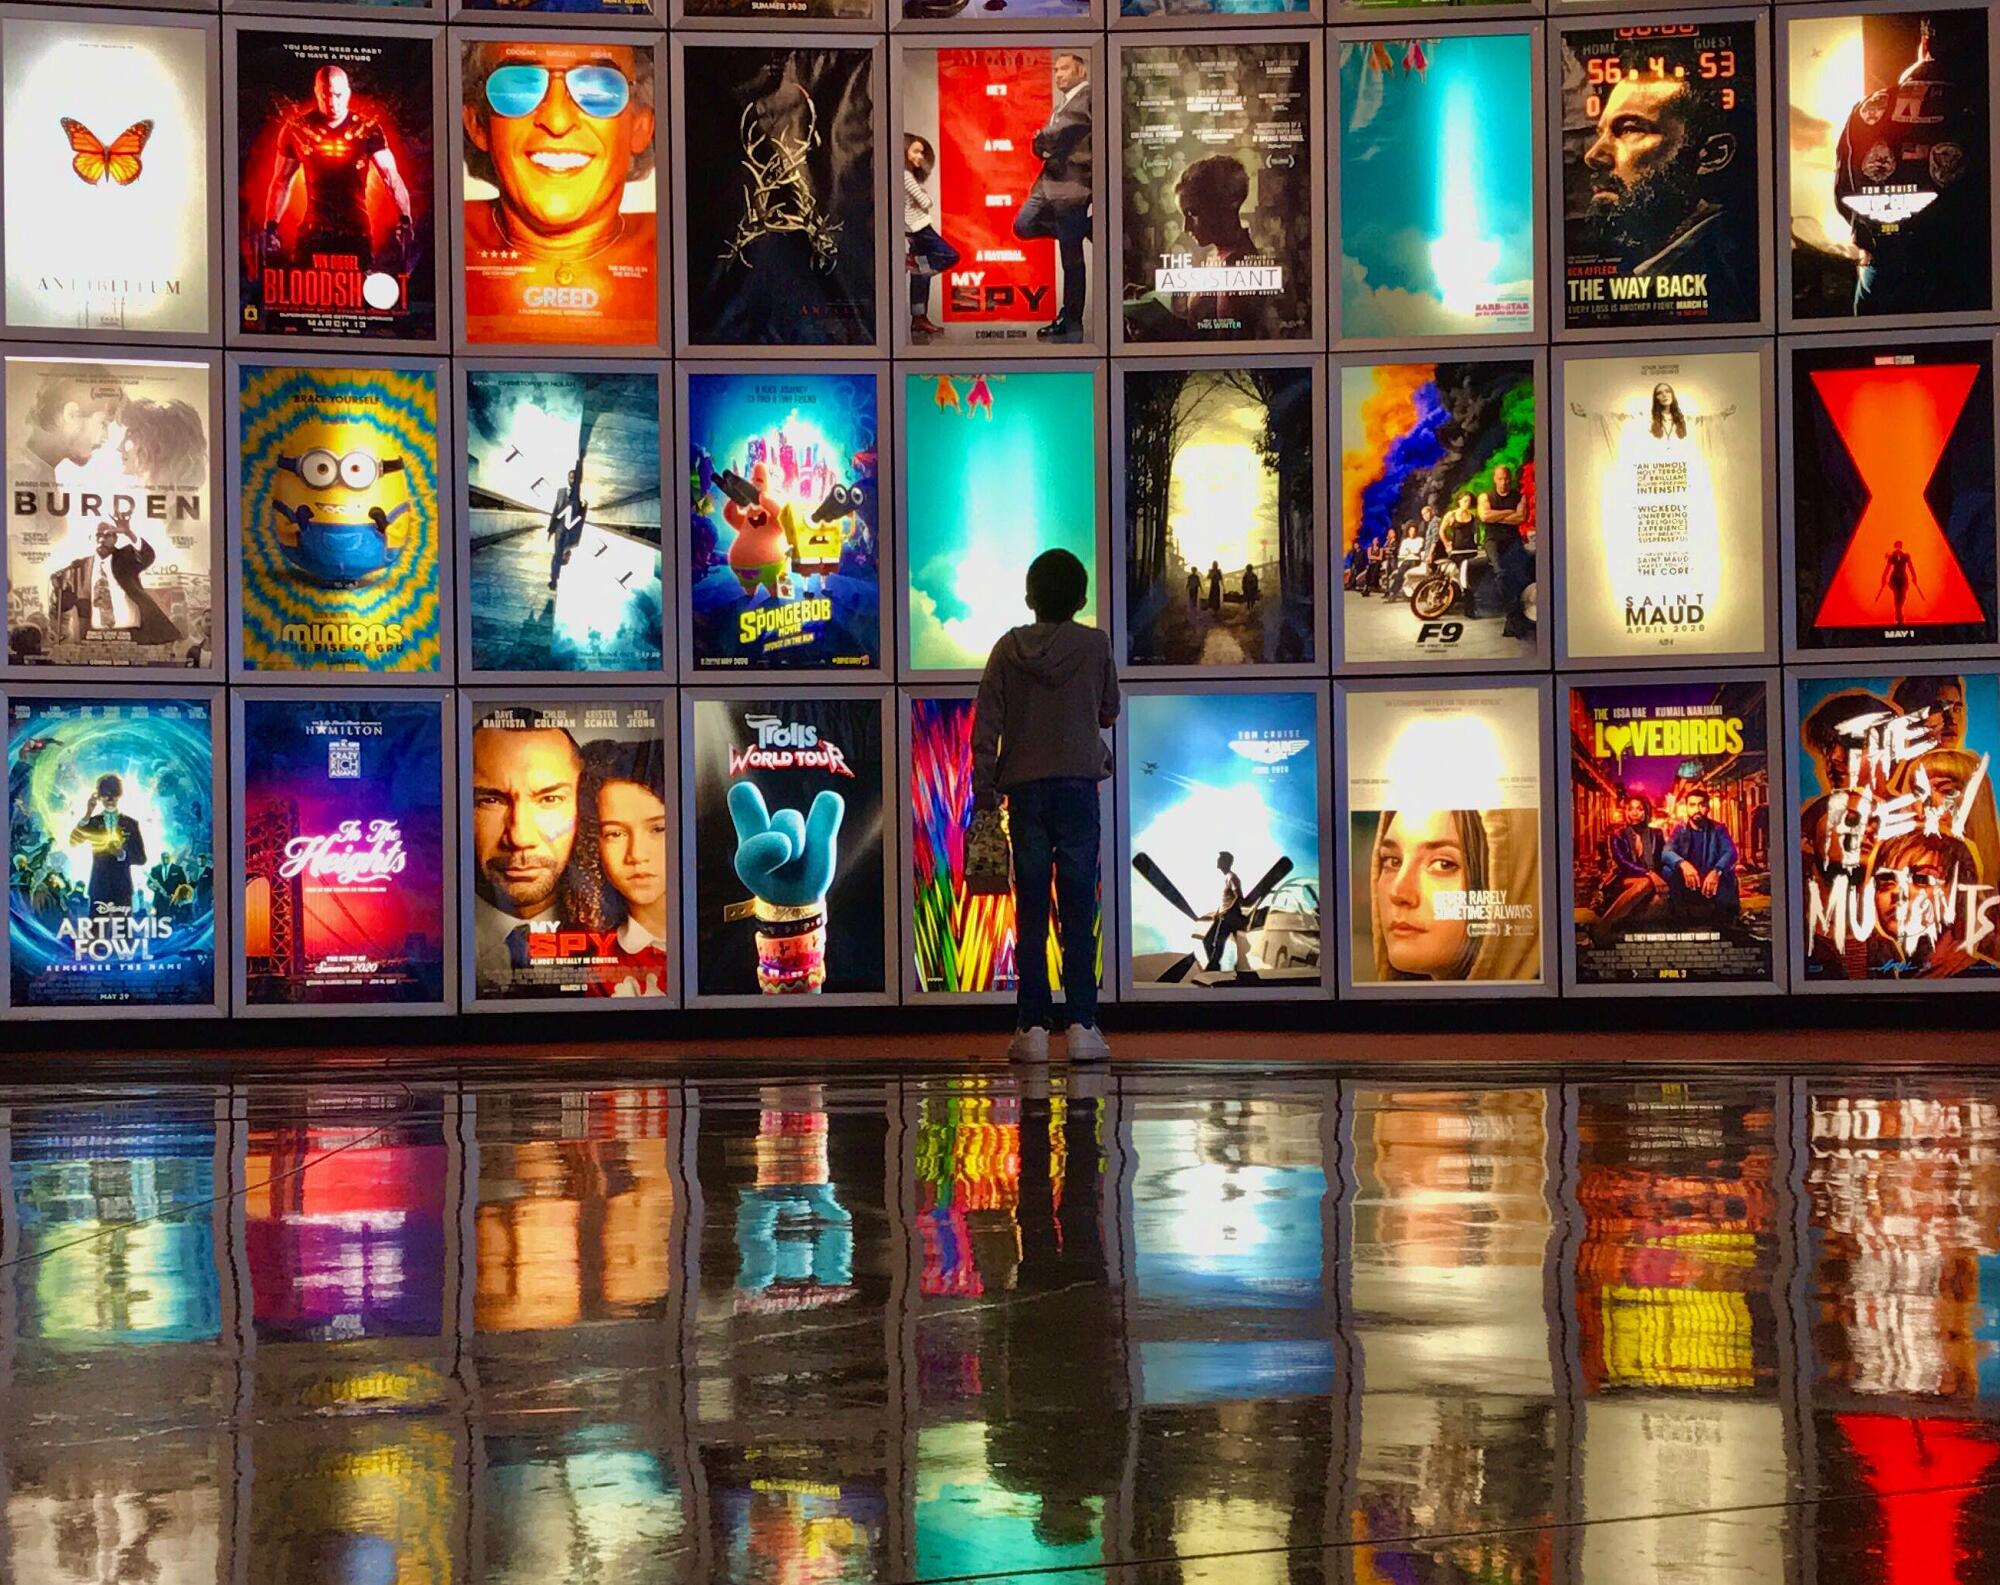 A child looks at movie posters inside the lobby of the Arclight movie theater in Manhattan Beach. The movie industry is taking big losses as the coronavirus spreads, with film releases being postponed indefinitely.